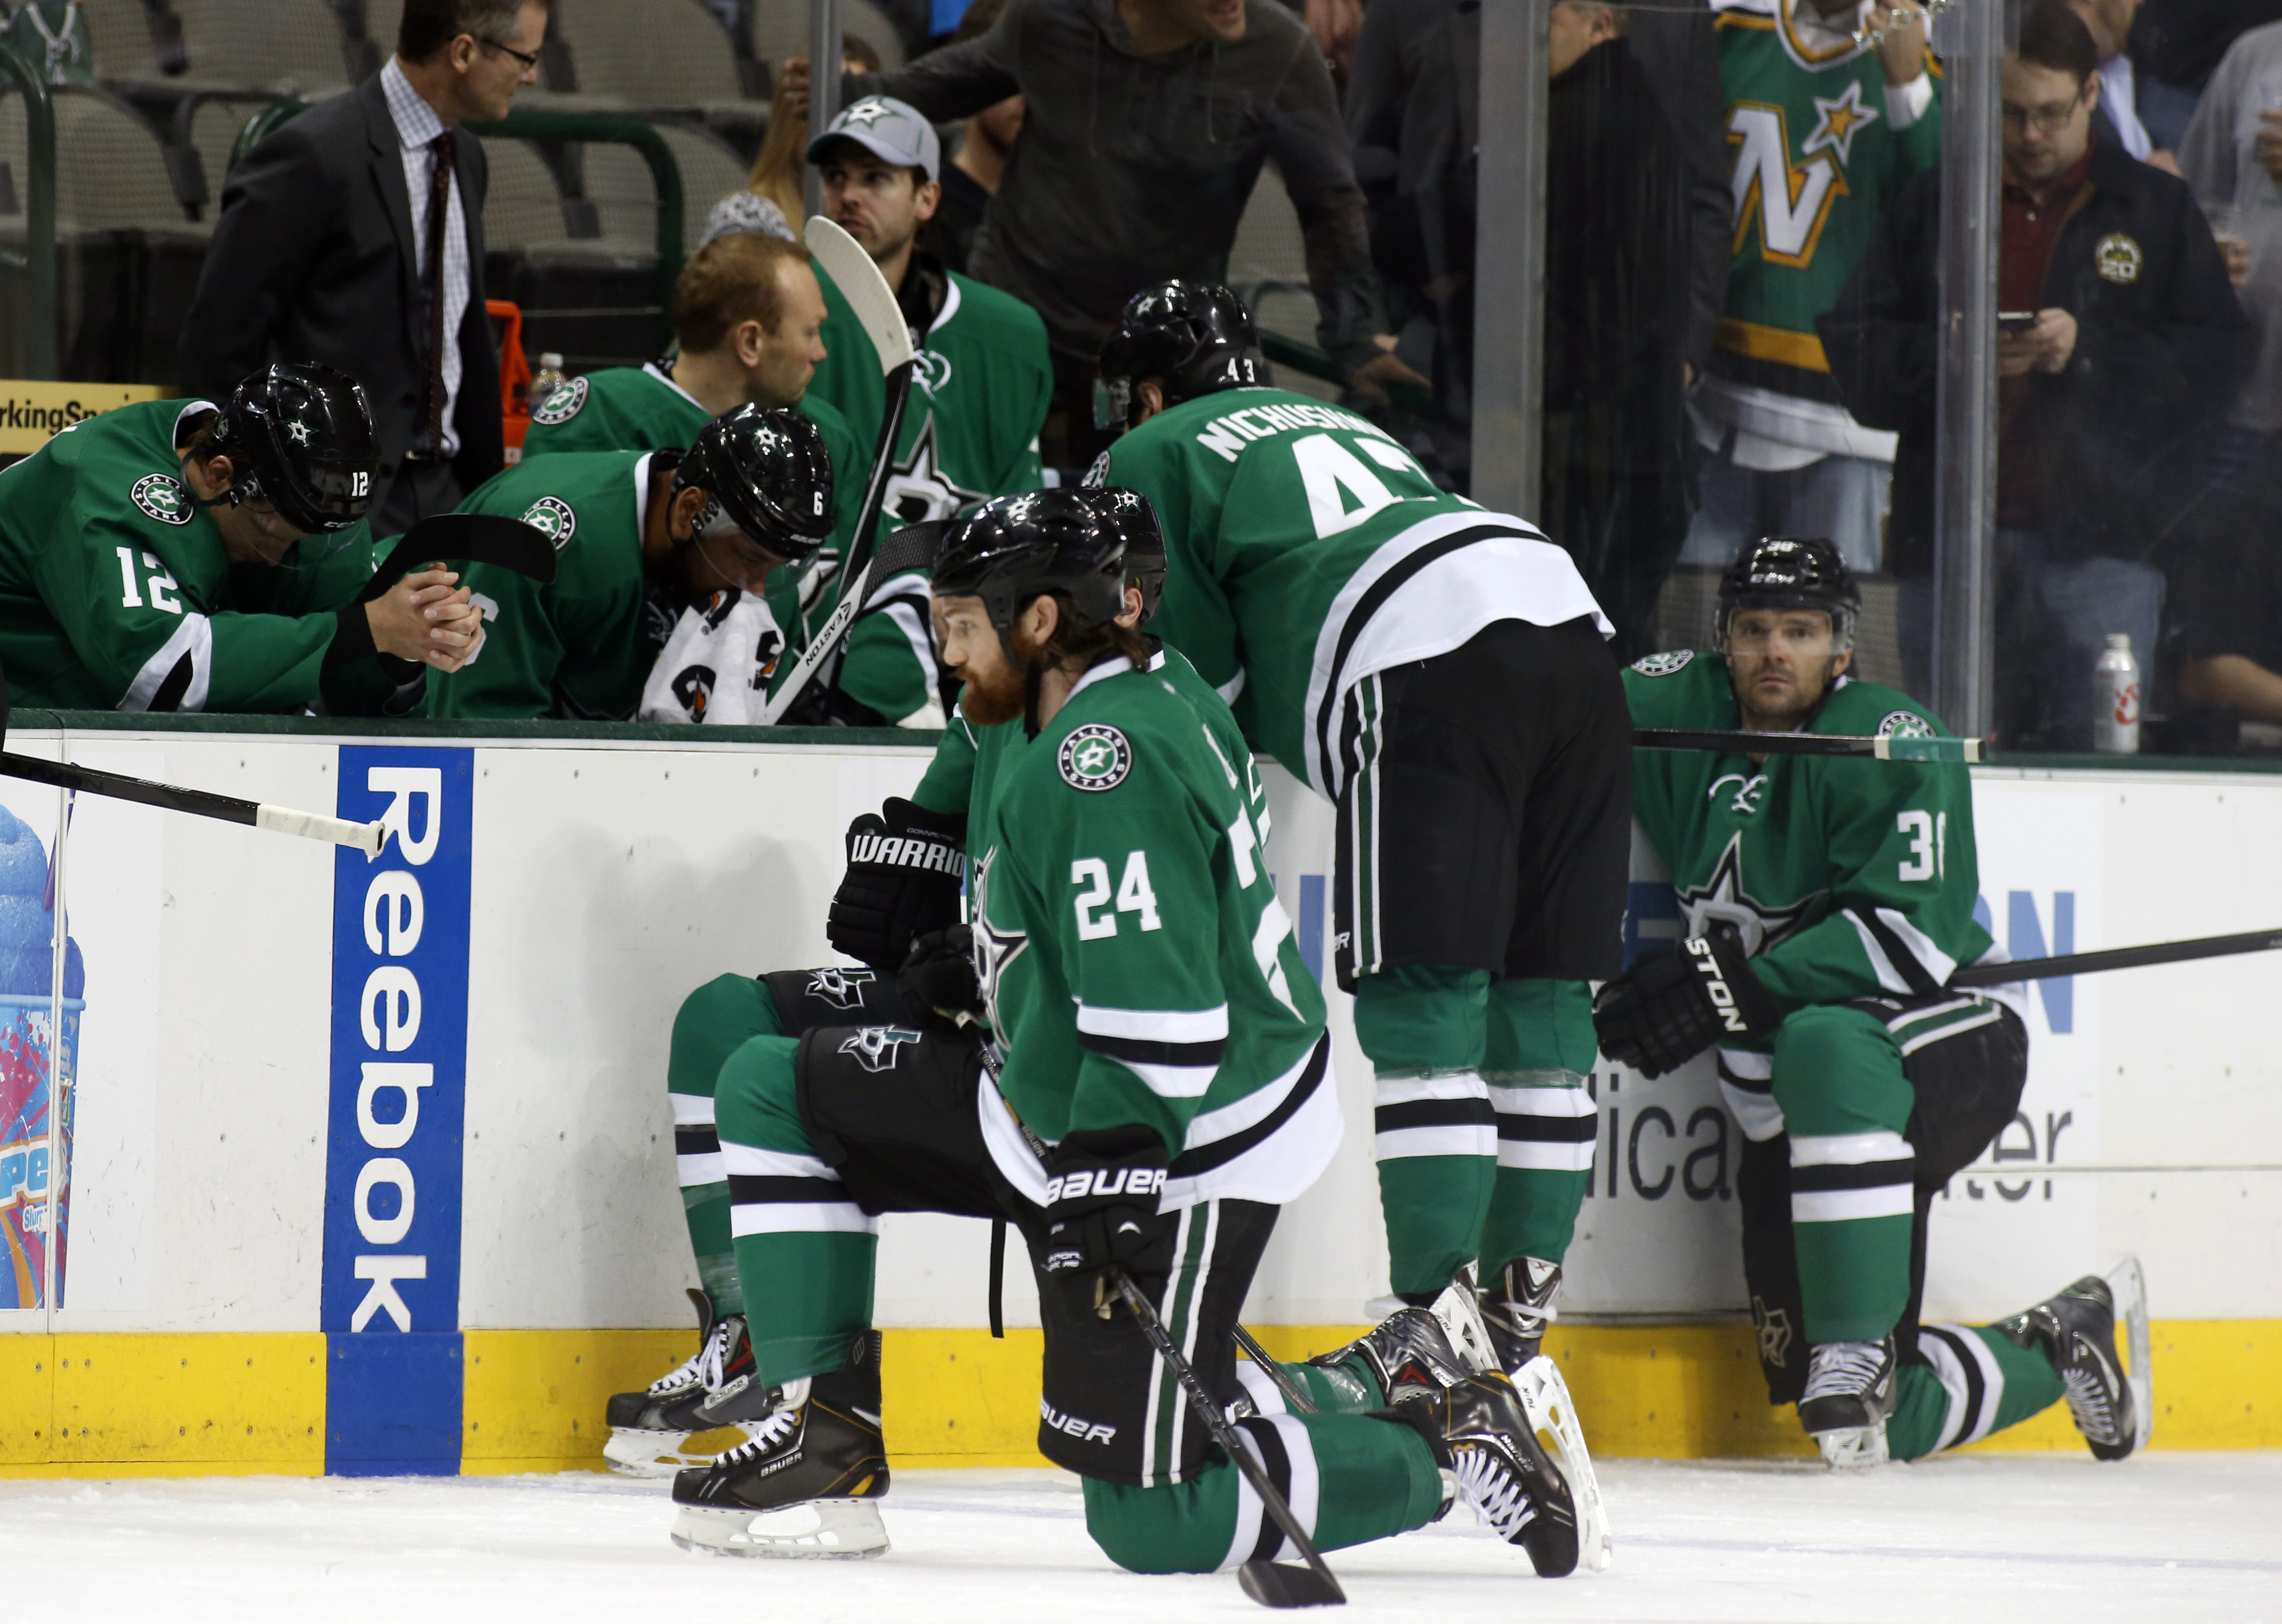 Scary Scene At Nhl Game As Dallas Stars Rich Peverley Collapses On Bench From Cardiac Event Cbs News